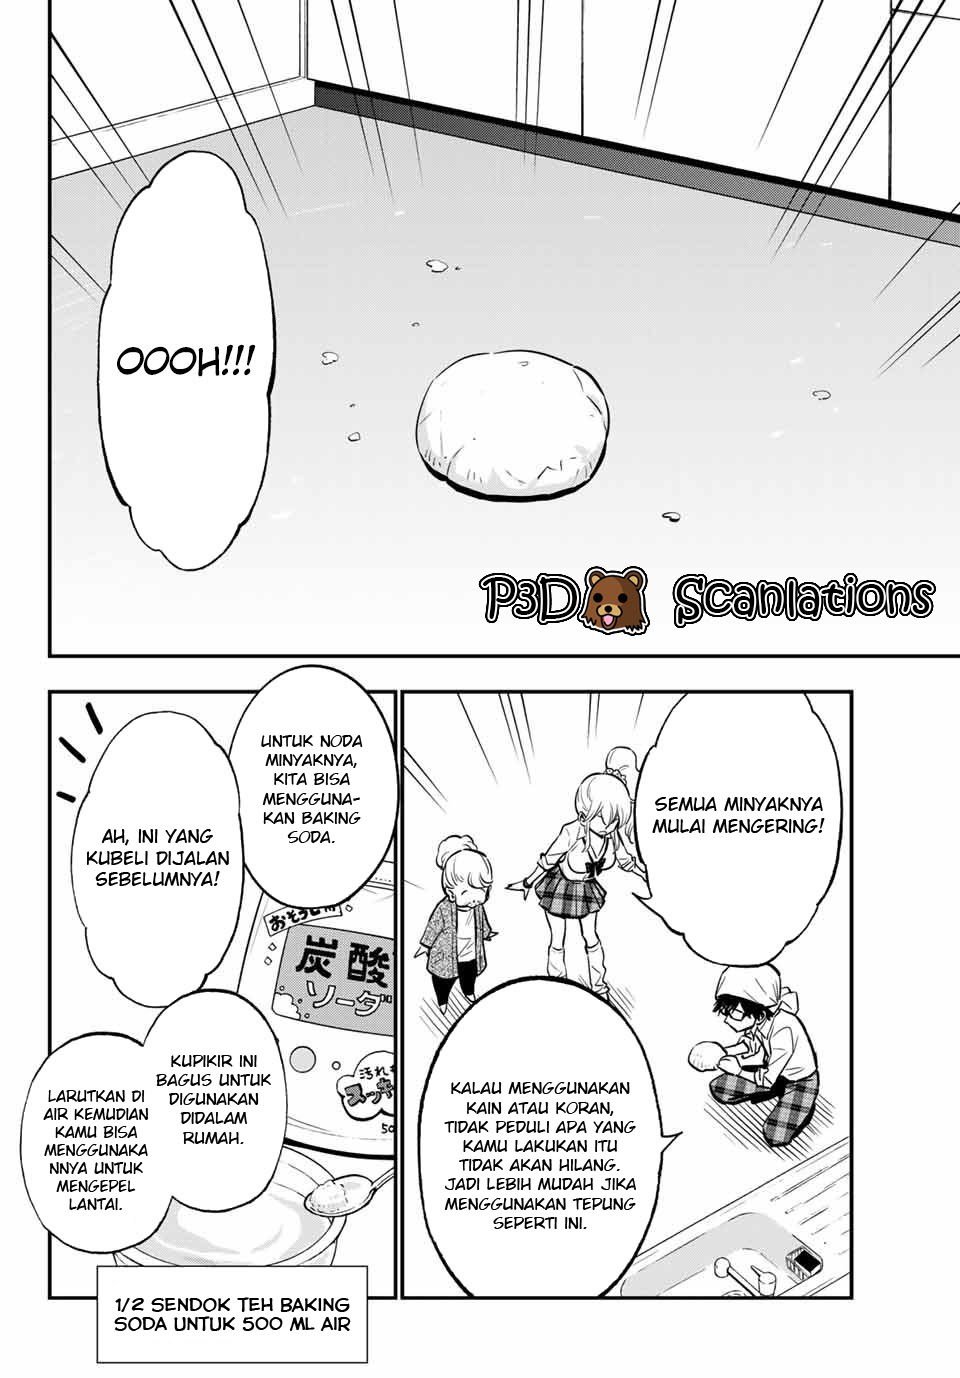 Gal☆Cleaning! Chapter 05